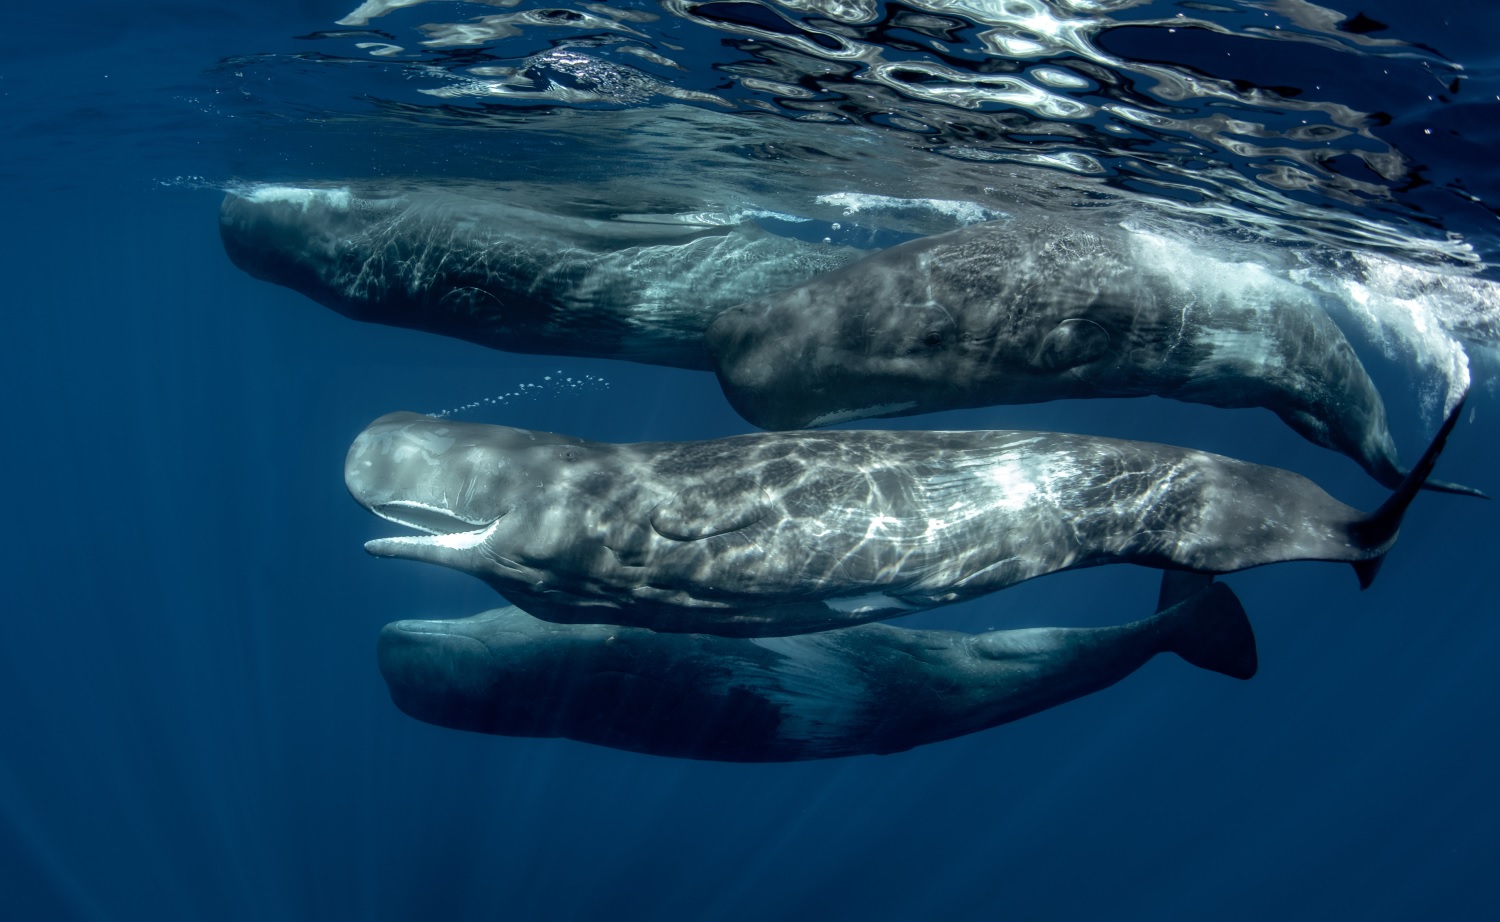 A pod of whales swimming underwater.